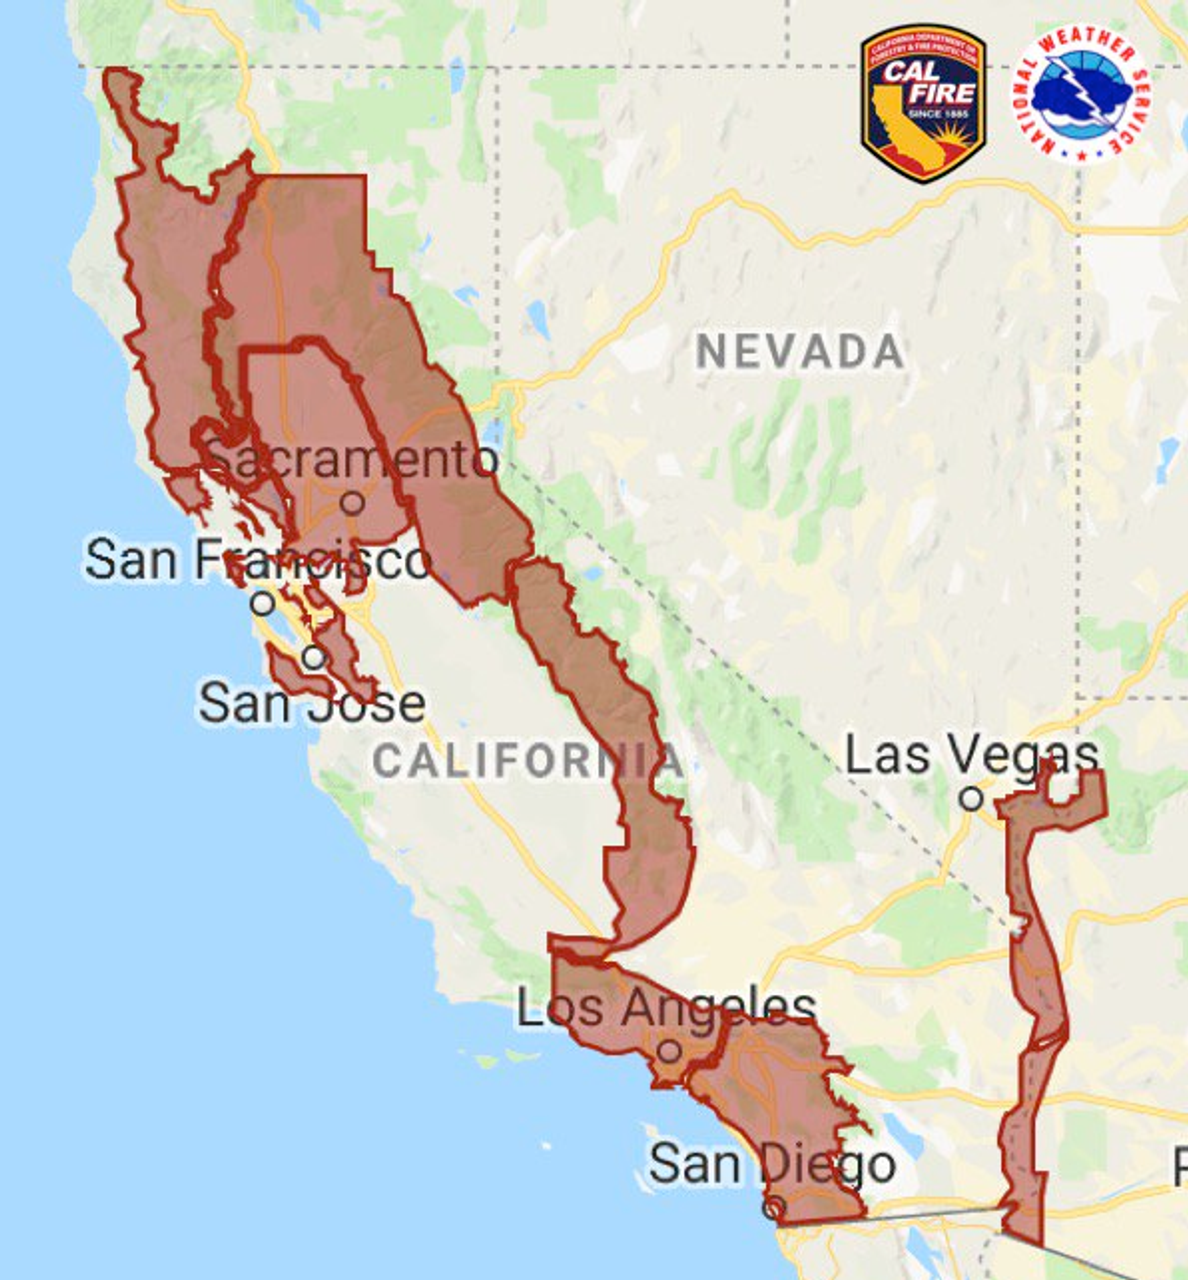 Red Flag fire warnings currently in effect in California